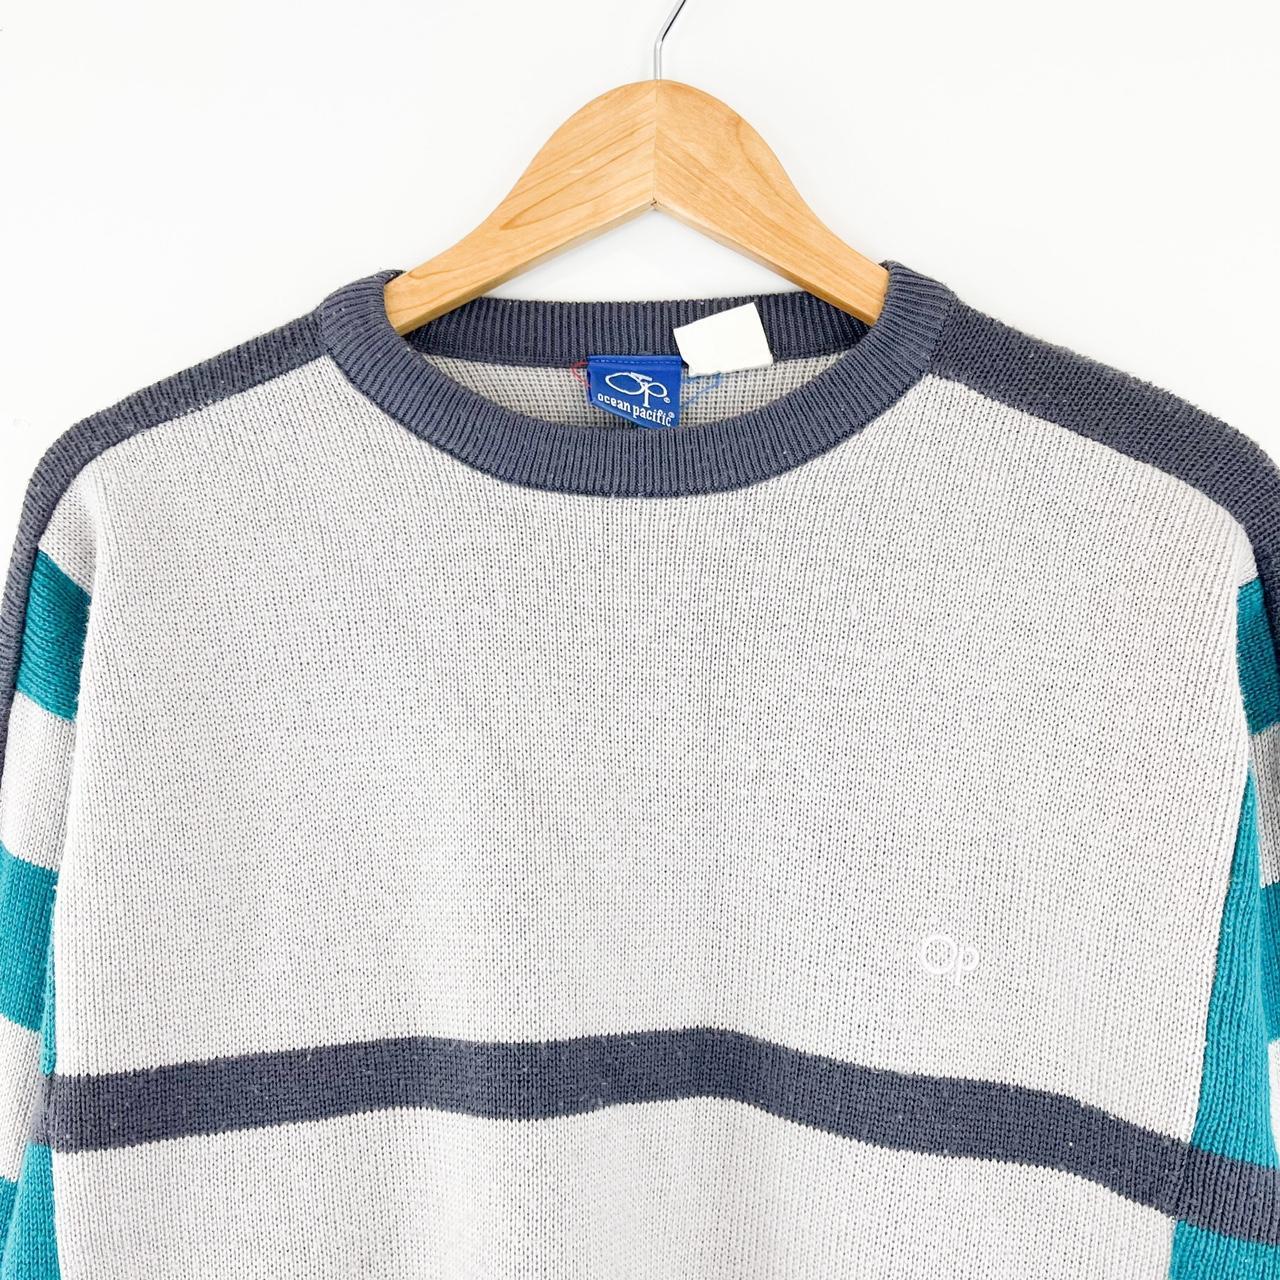 Product Image 2 - vintage ocean pacific striped sweater

appears